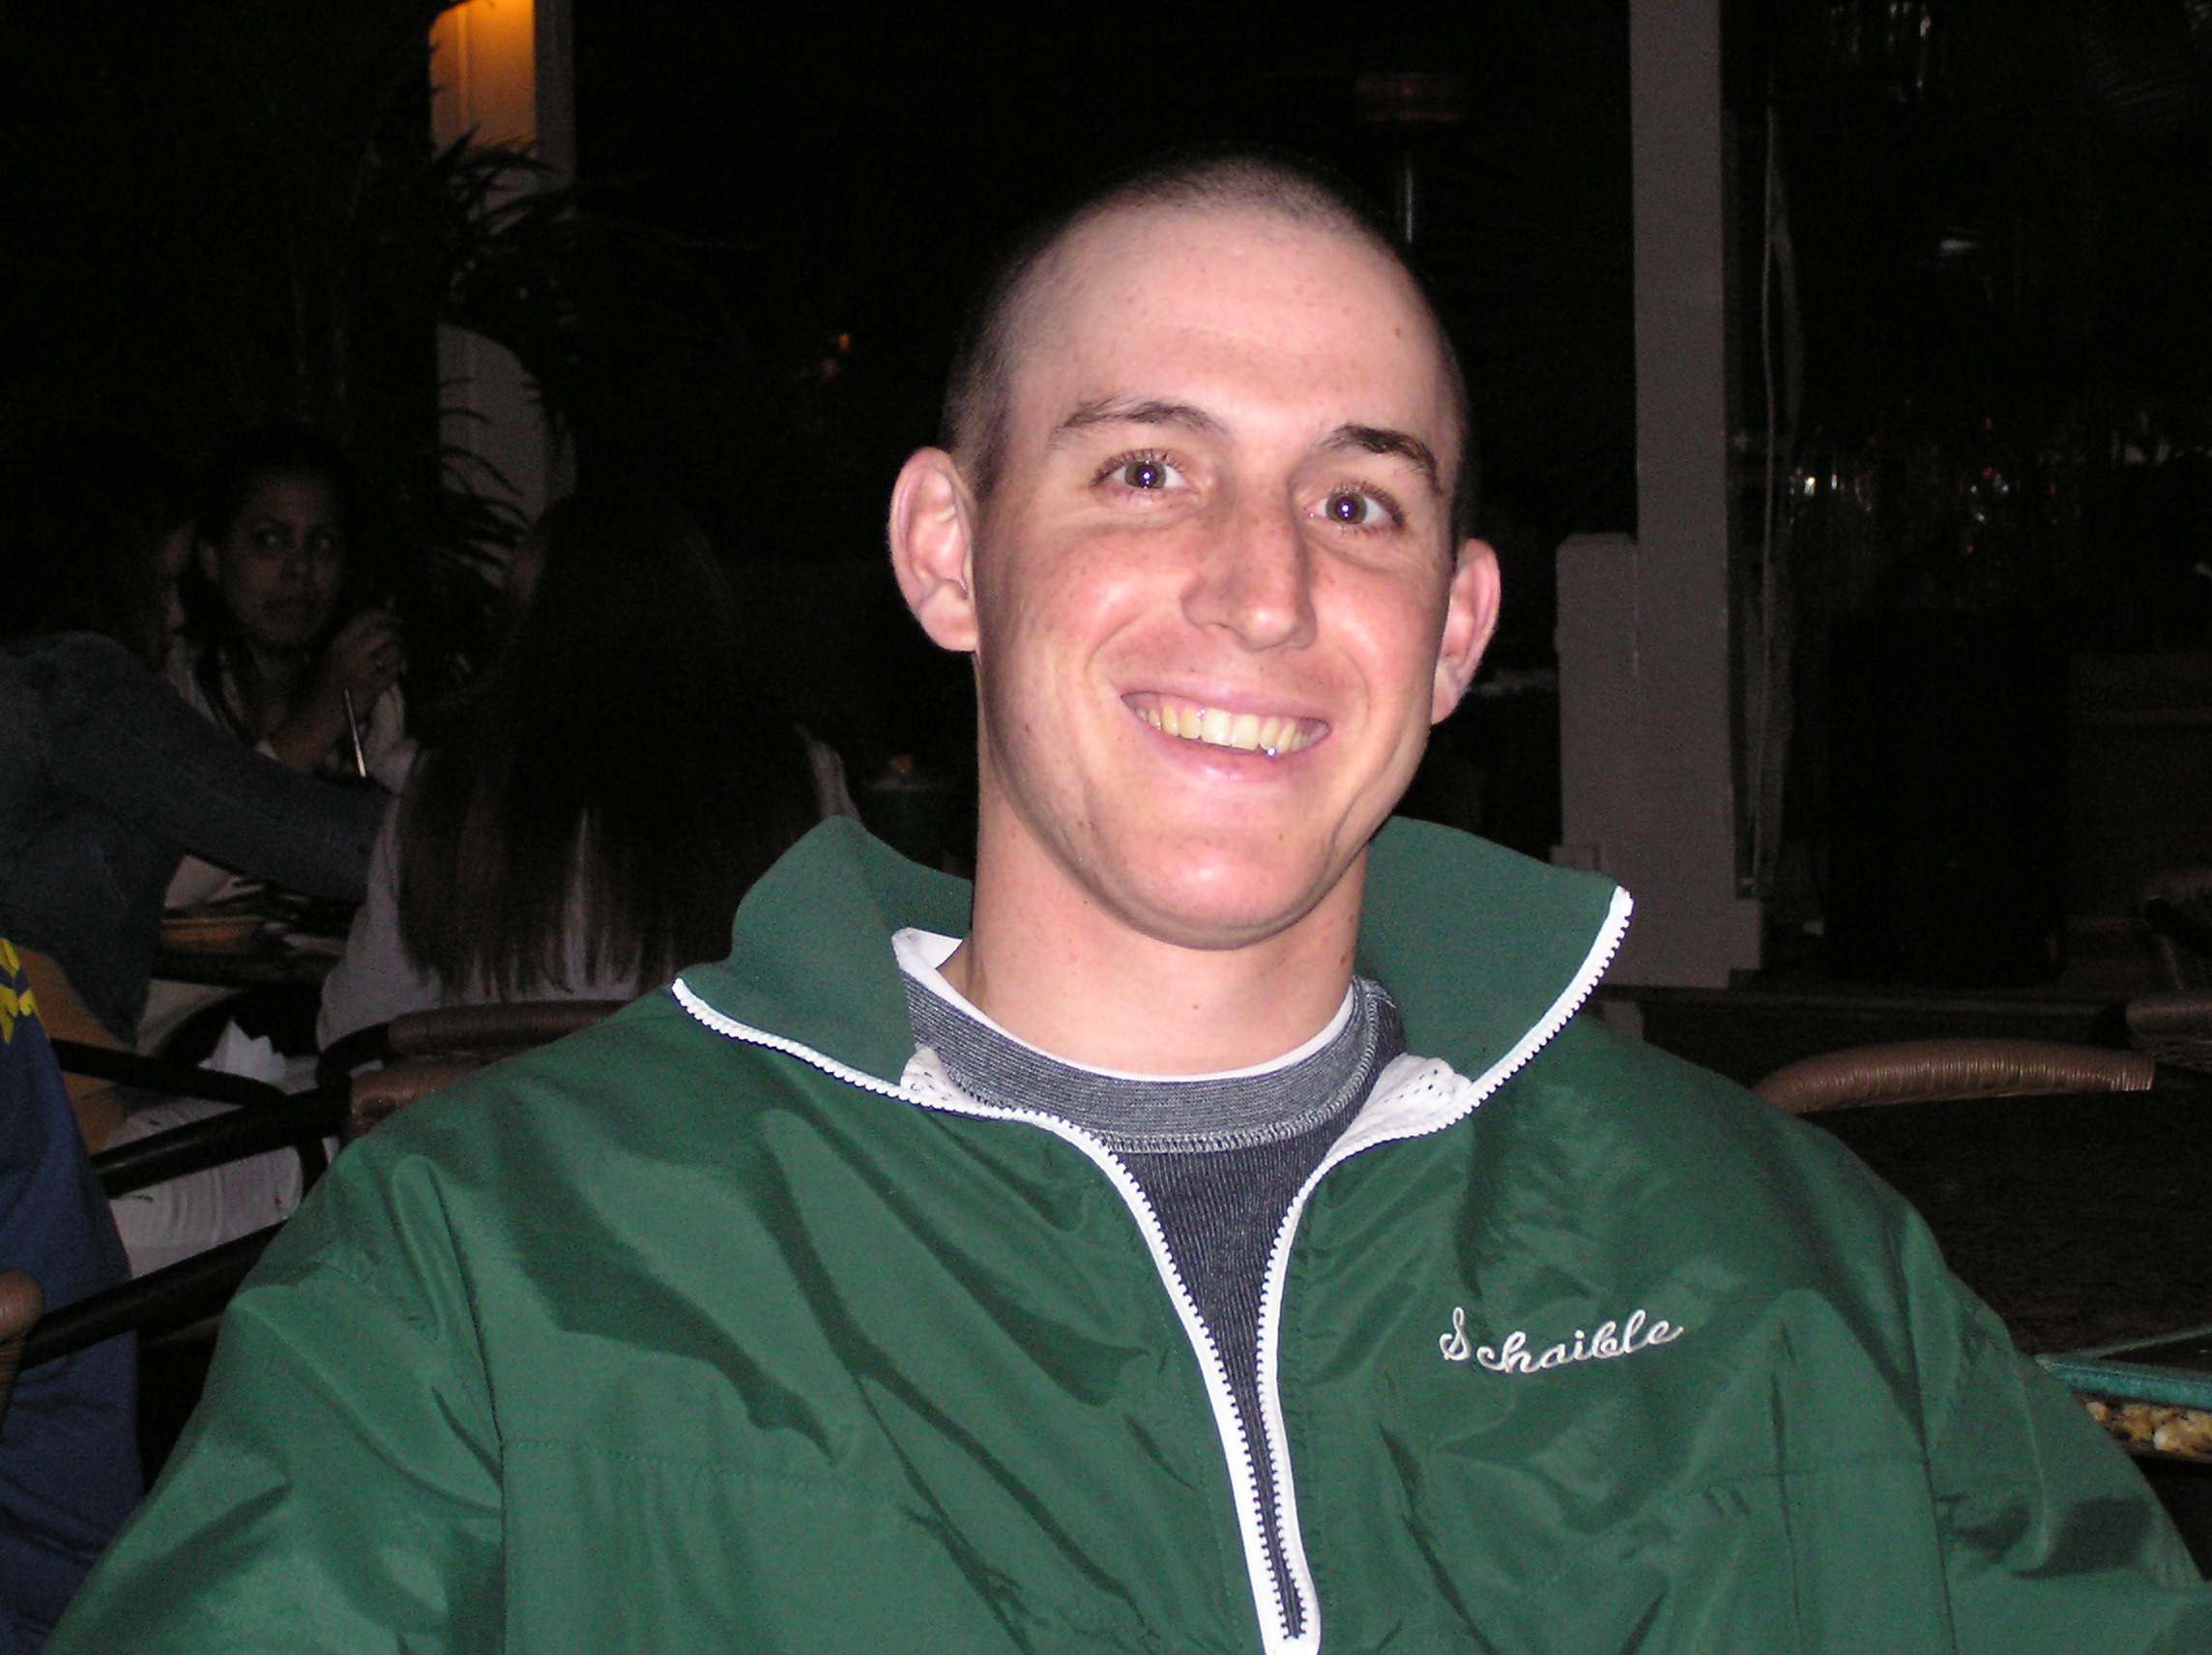 Jason P. Schaible, the inspiration for the JPS Memorial Fund